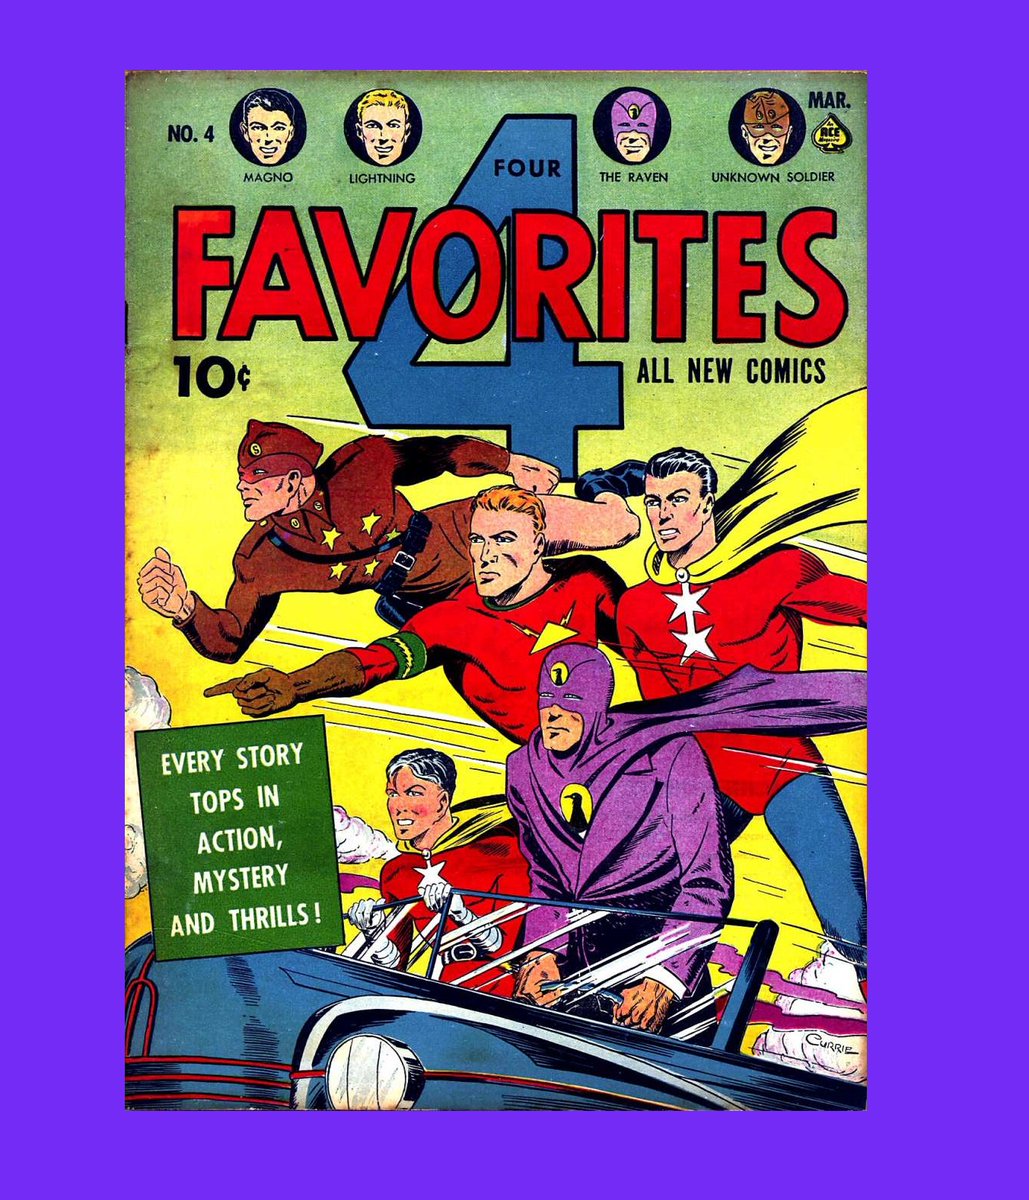 #4Favorites - #AceMagazines (Ace Periodicals) 4 Favorites Issue #4 (March 1942) changes line-up, replacing #Vulcan for #UnknownSoldier from Our Flag Comics - with -#Raven Danny Dartin, #Lightning Robert Morgan (aka 'Lash  Lighting') #Magno and Davey in '4 Favorites' -#MysteryMen